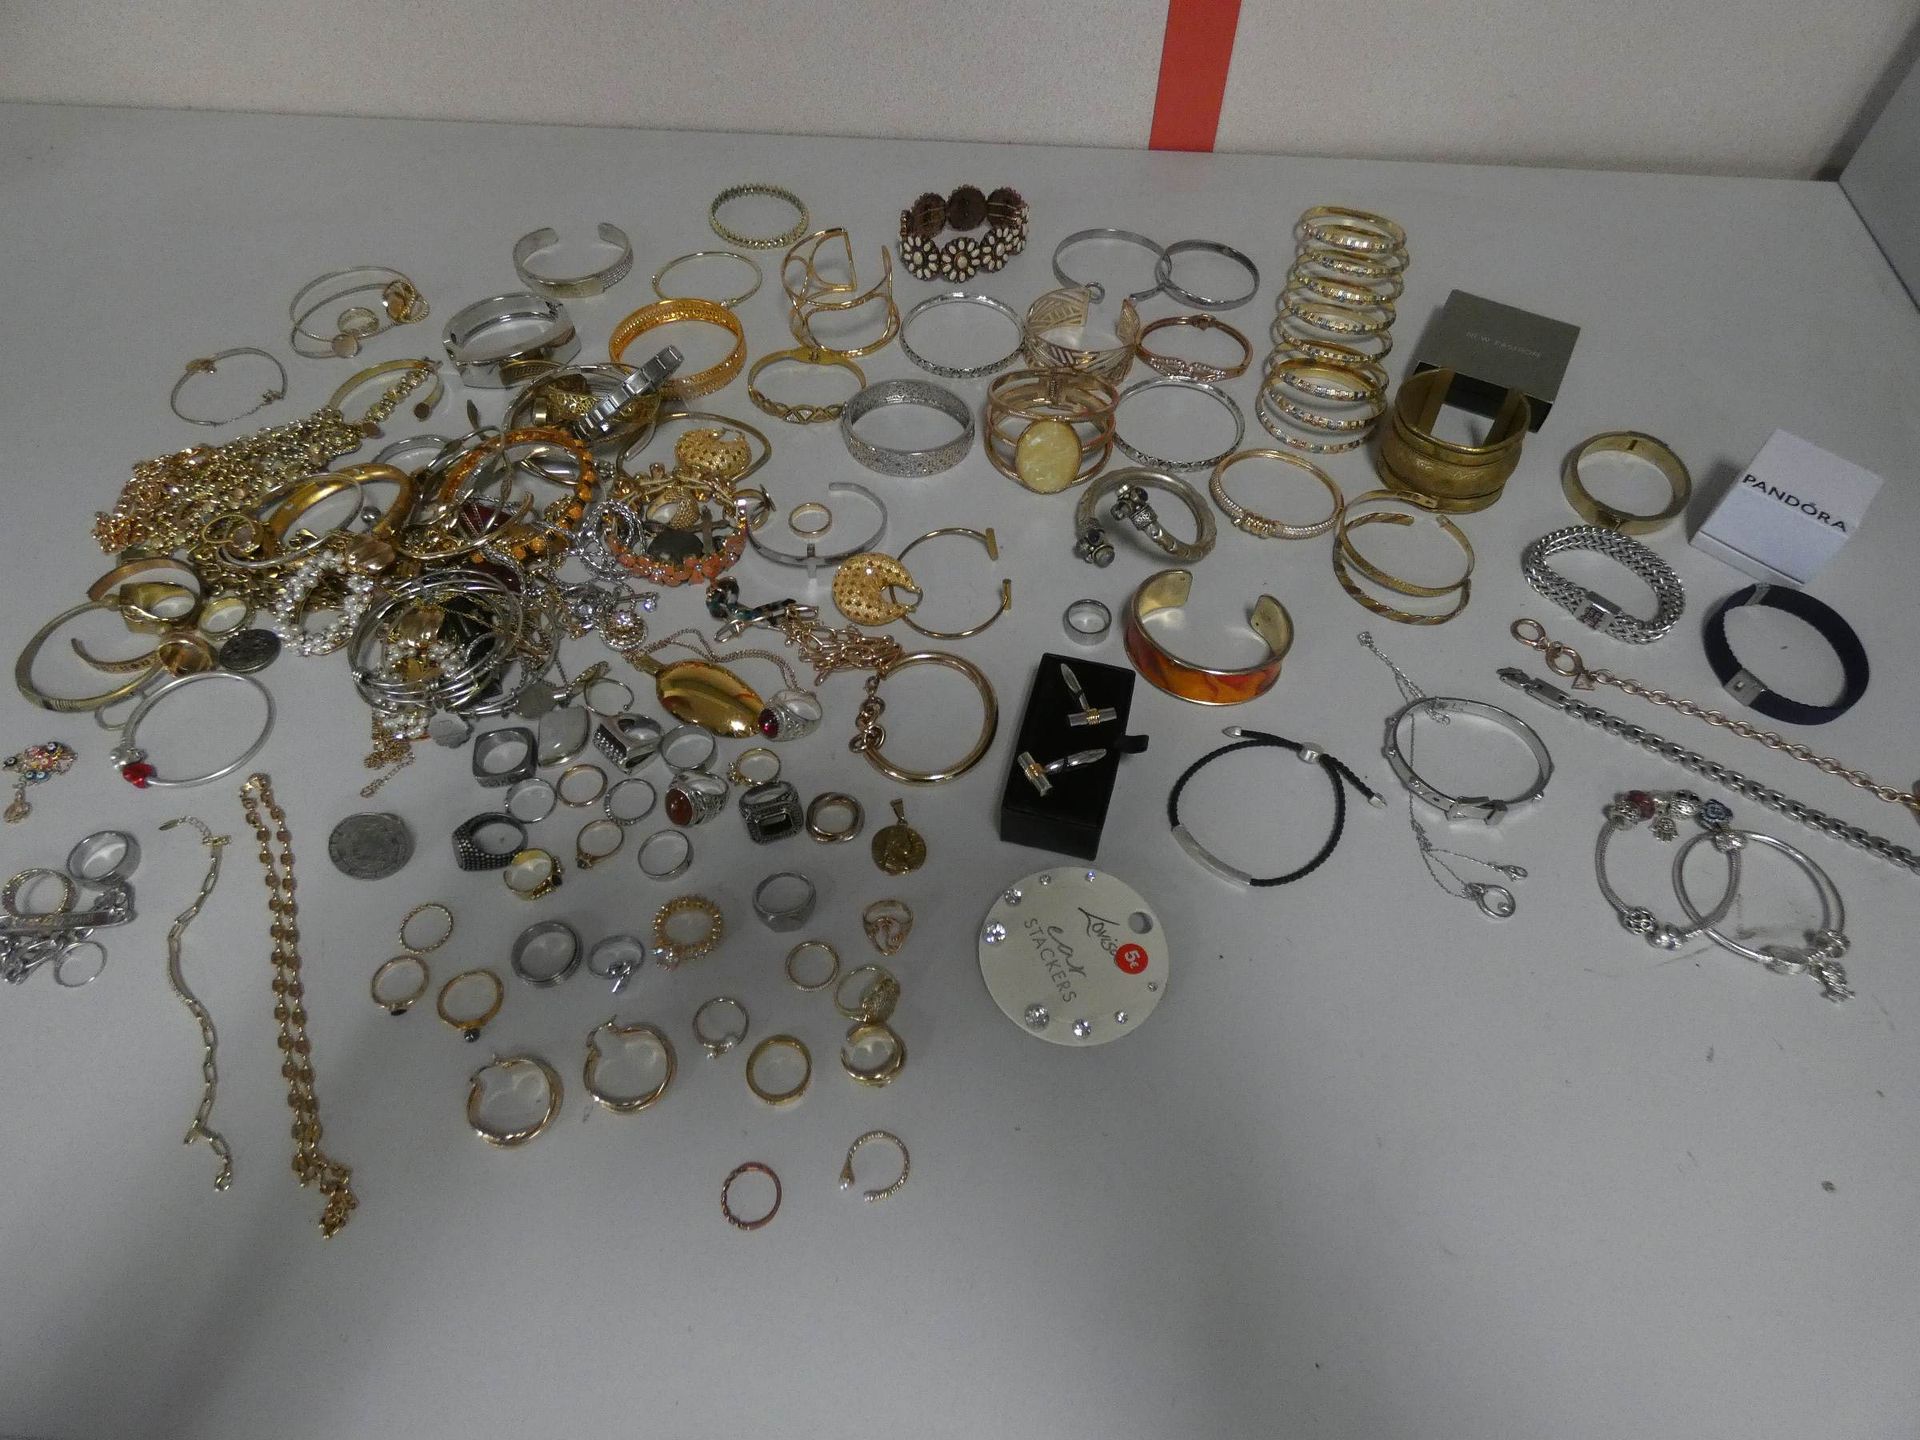 Null 2.3kg of costume jewelry

Place of delivery: MAGASIN DOMANIAL BIENS DIVERS
&hellip;